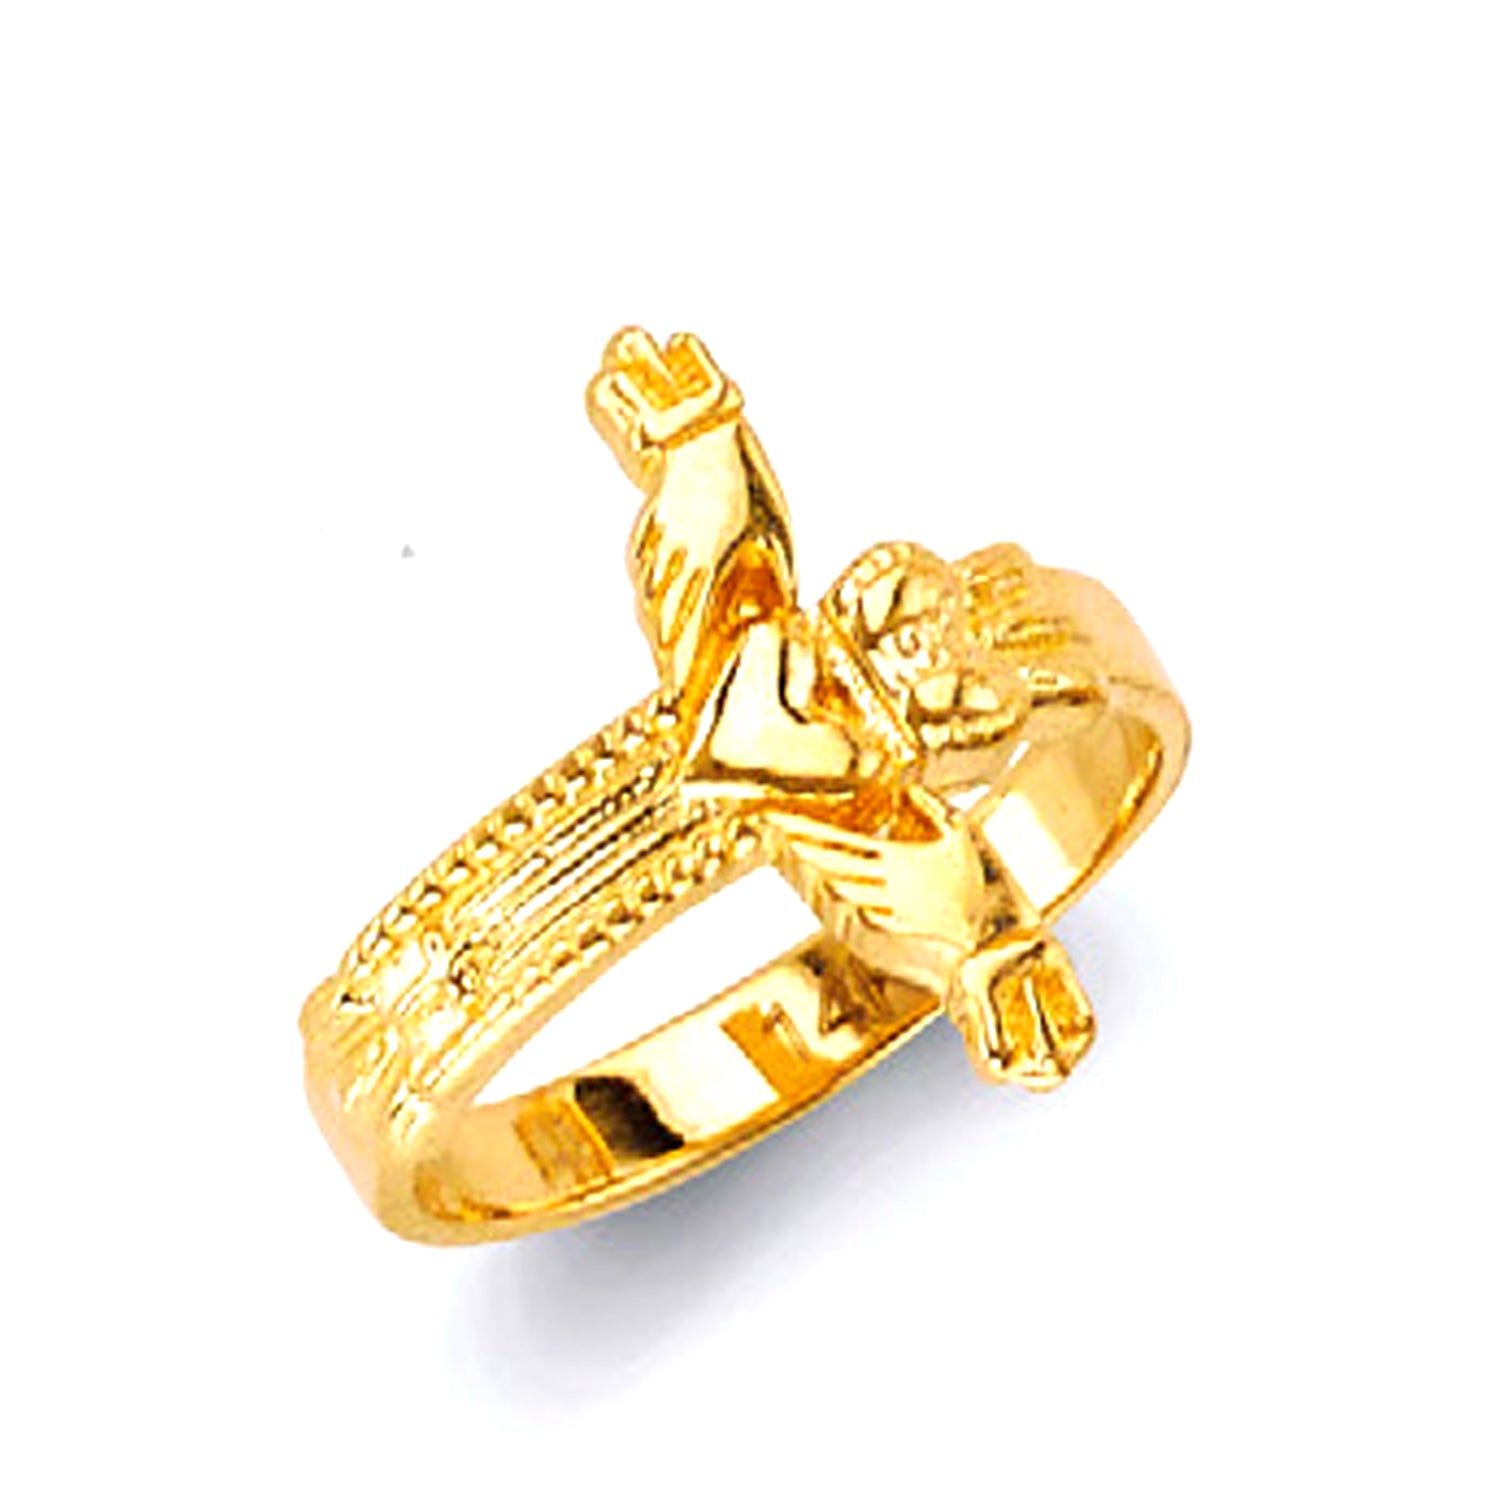 Designer Textured Ring in Solid Gold 